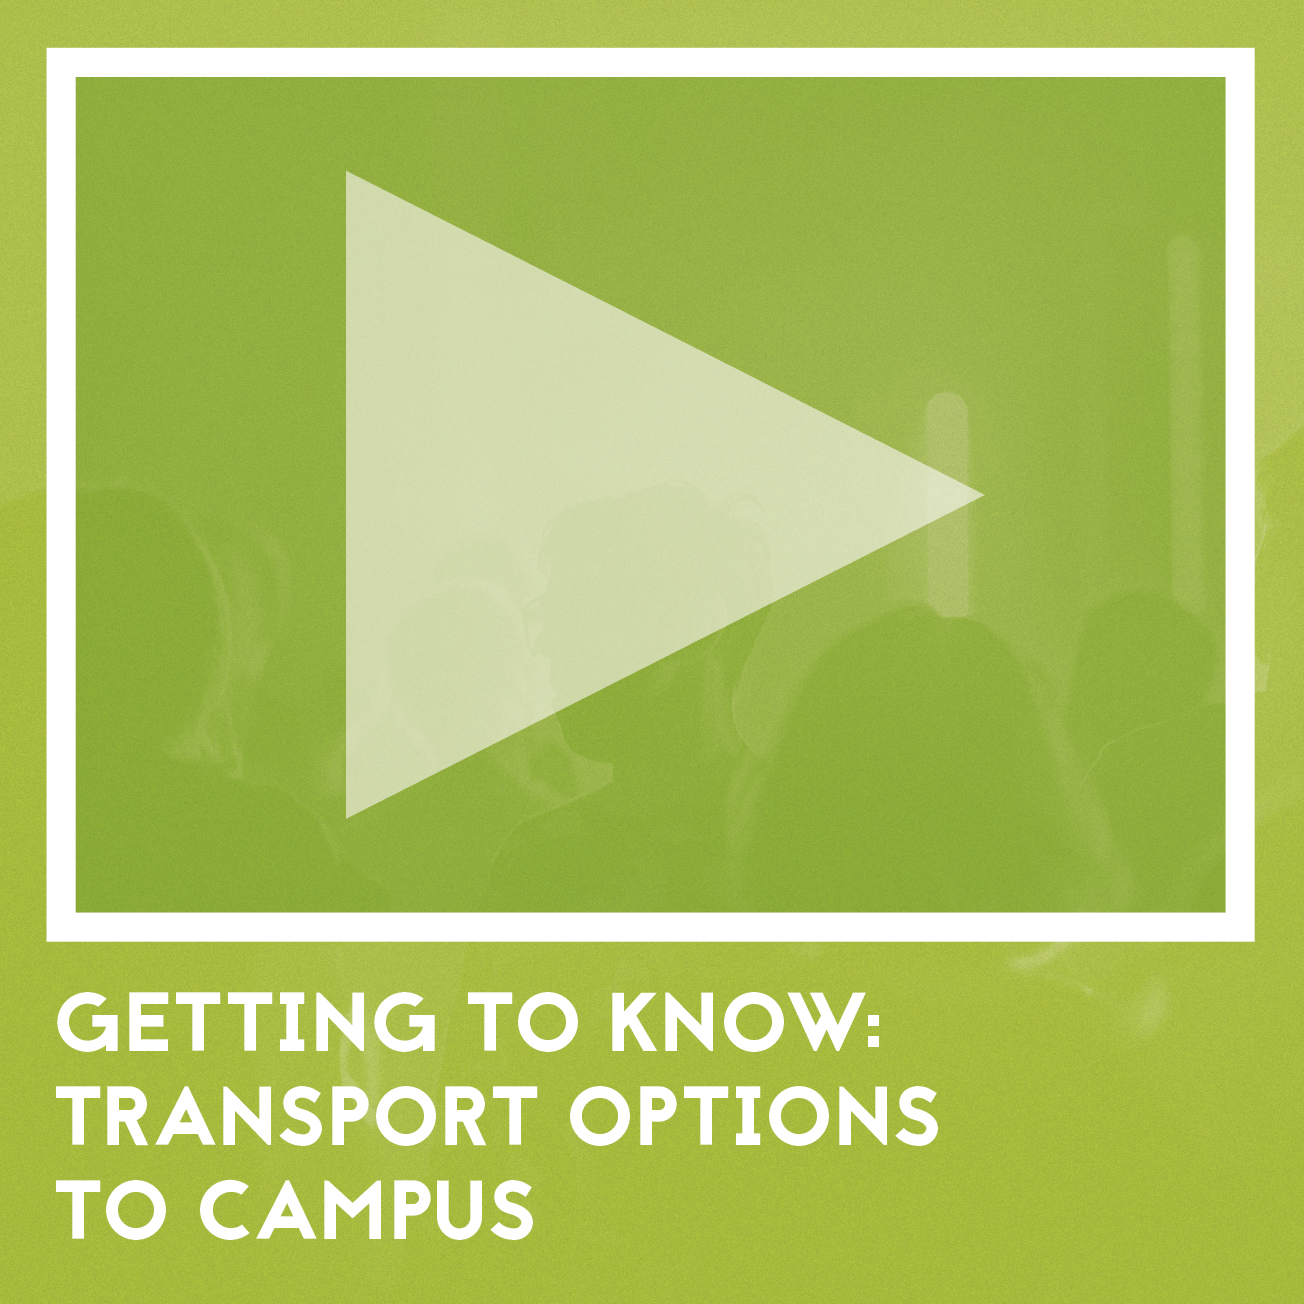 Getting to know transport options to campus